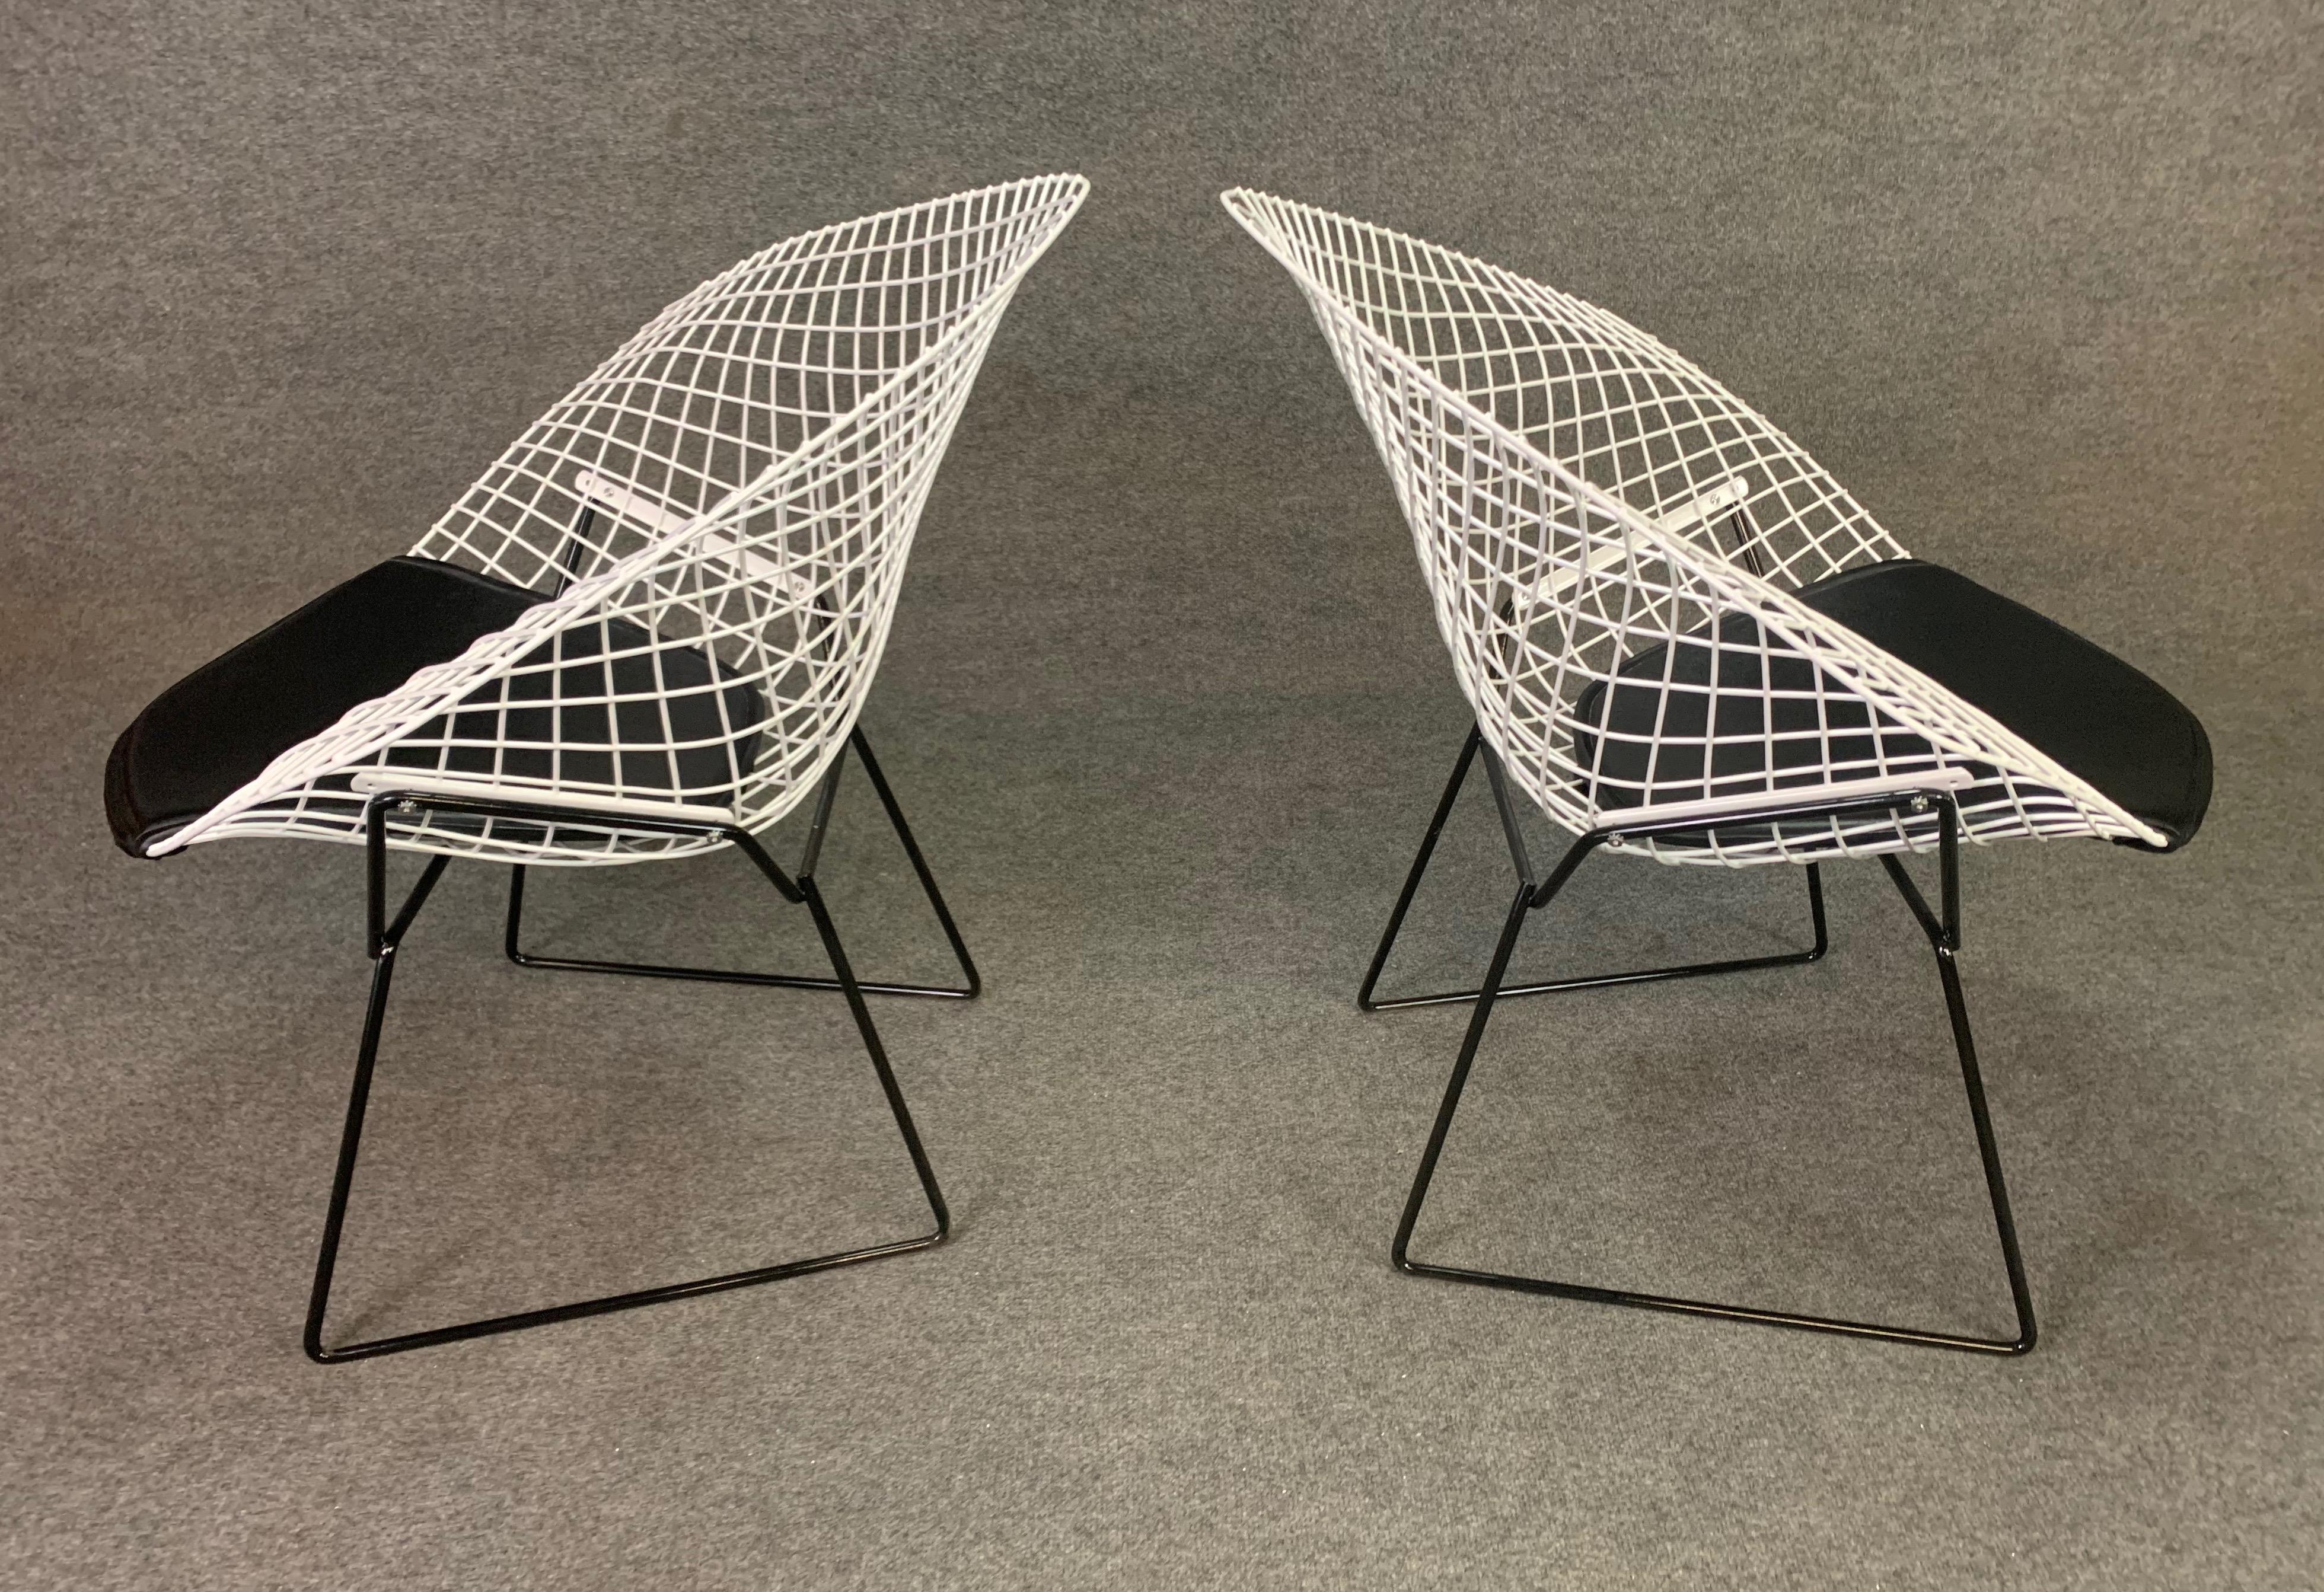 Pair of Vintage Mid-Century Modern Diamond Chairs by Harry Bertoia for Knoll 2